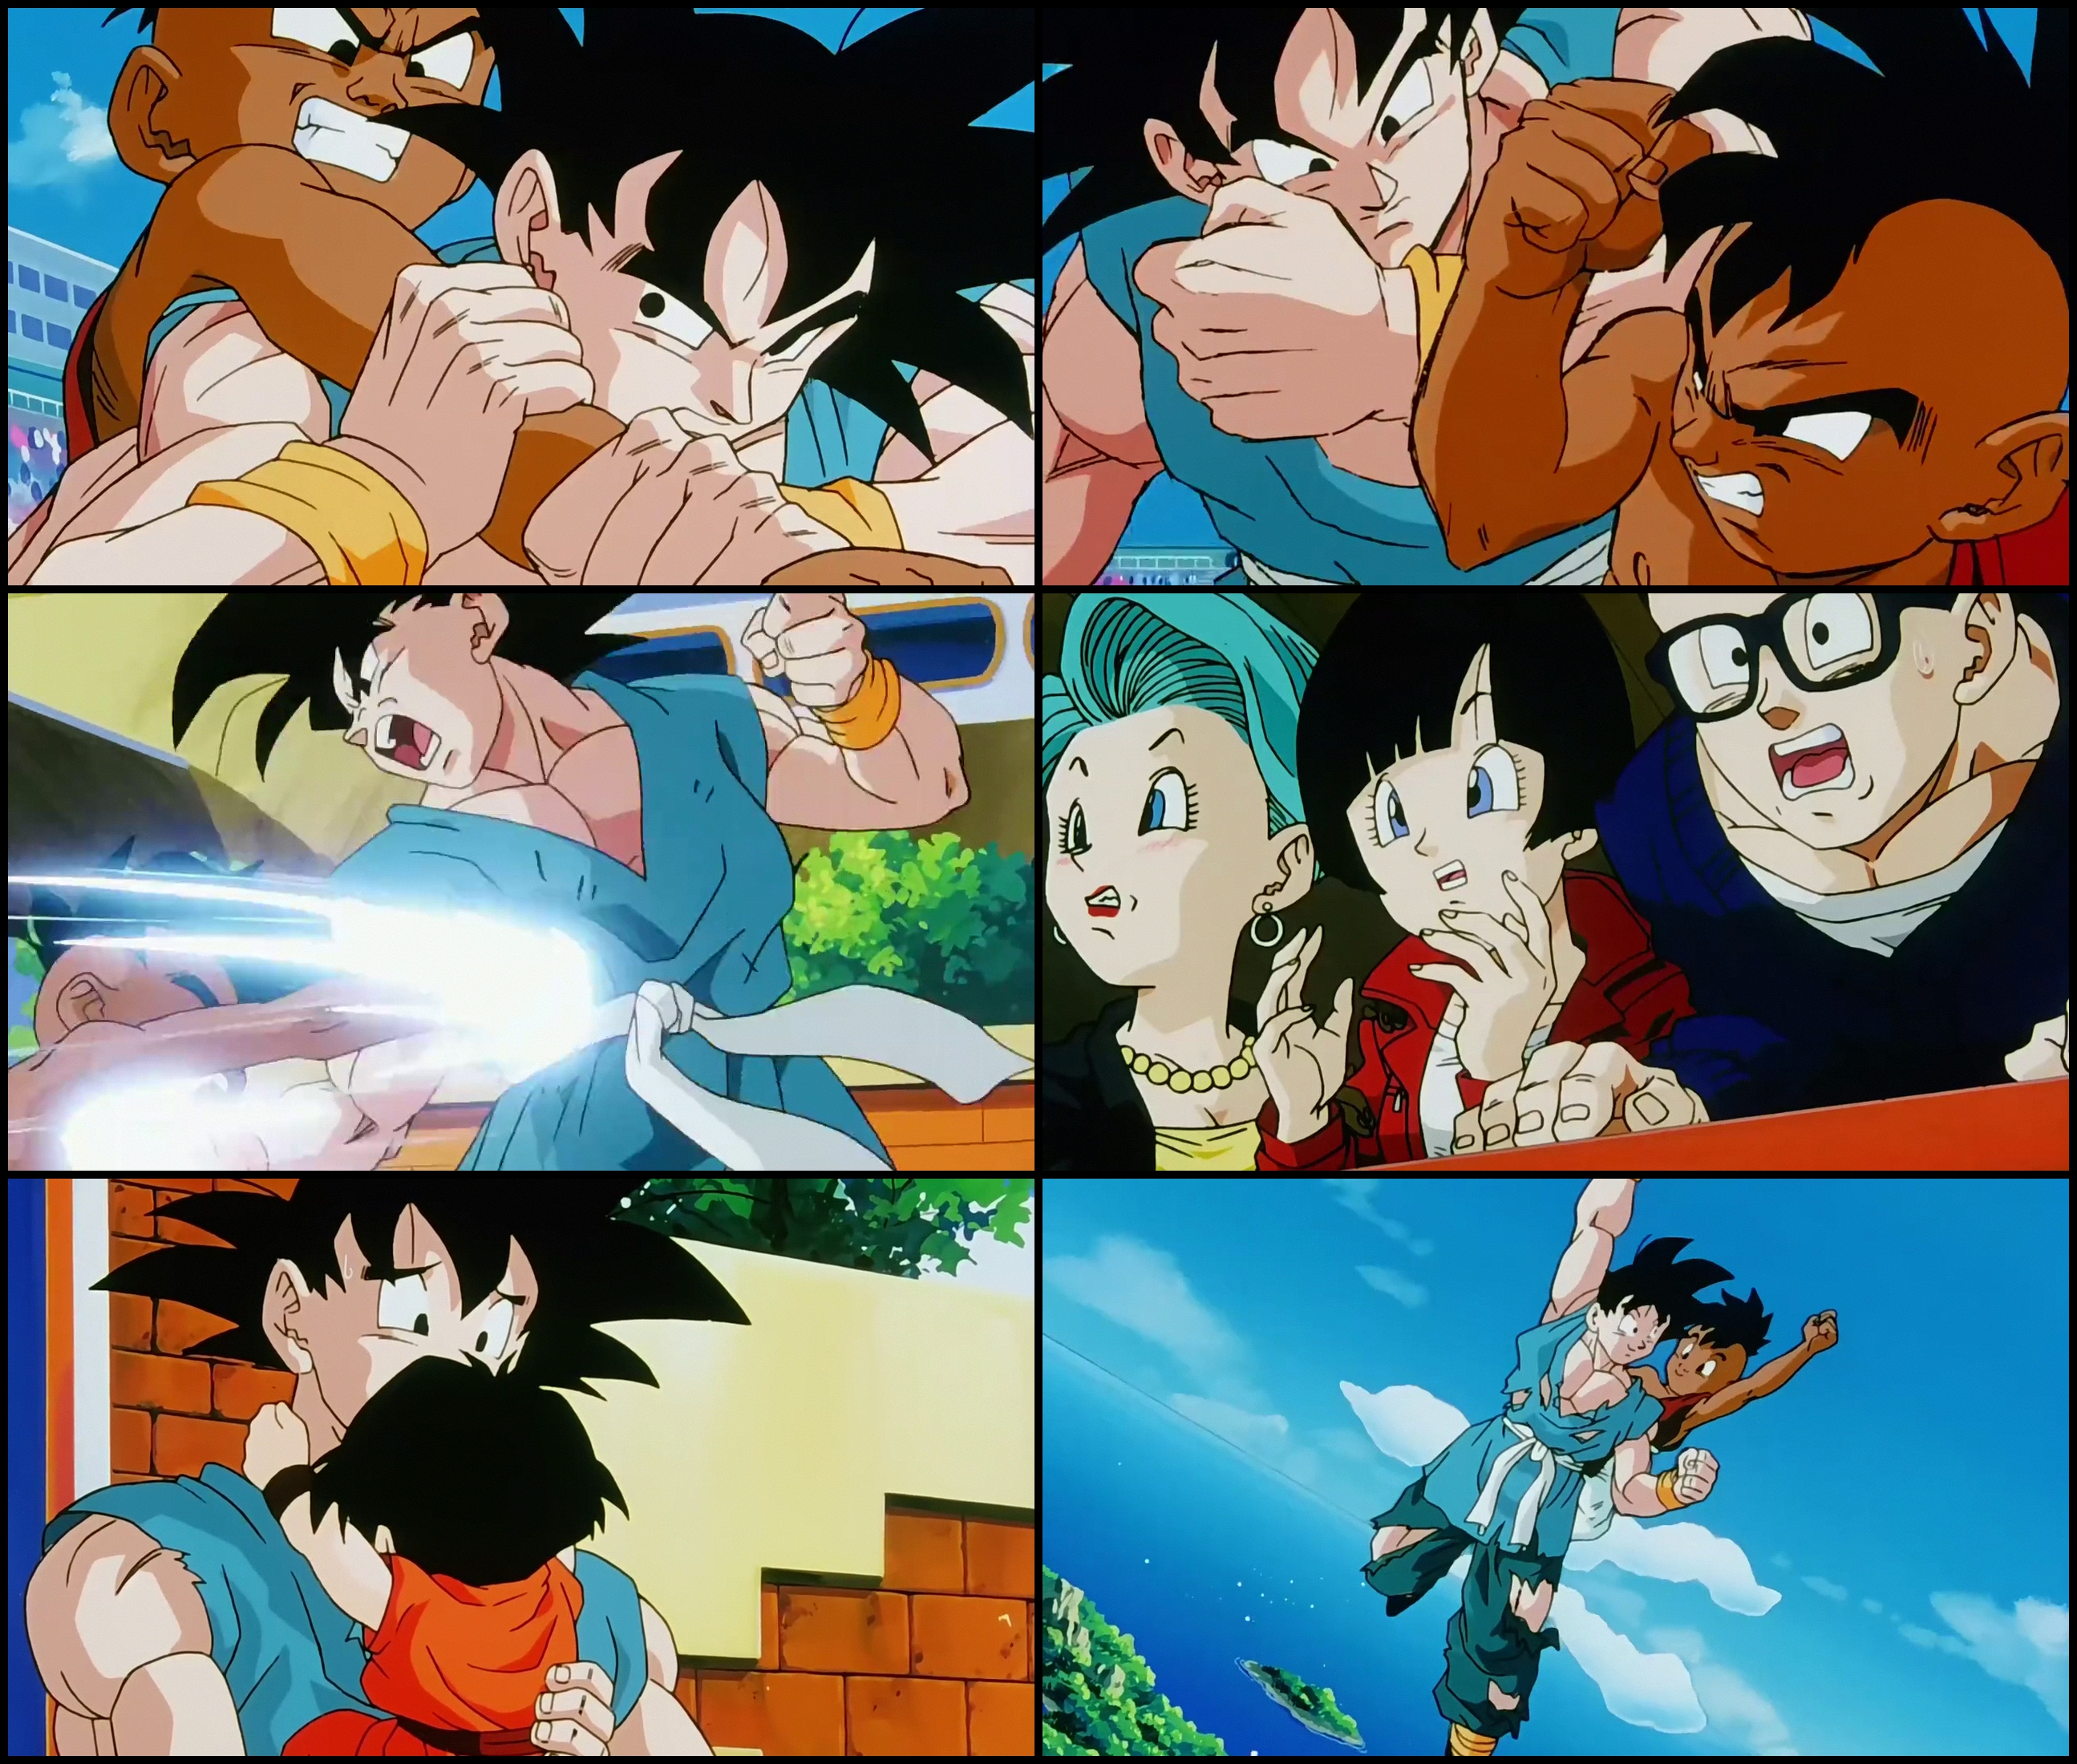 Dragon Ball Z Ep 291 (1) by gisel179620 on DeviantArt